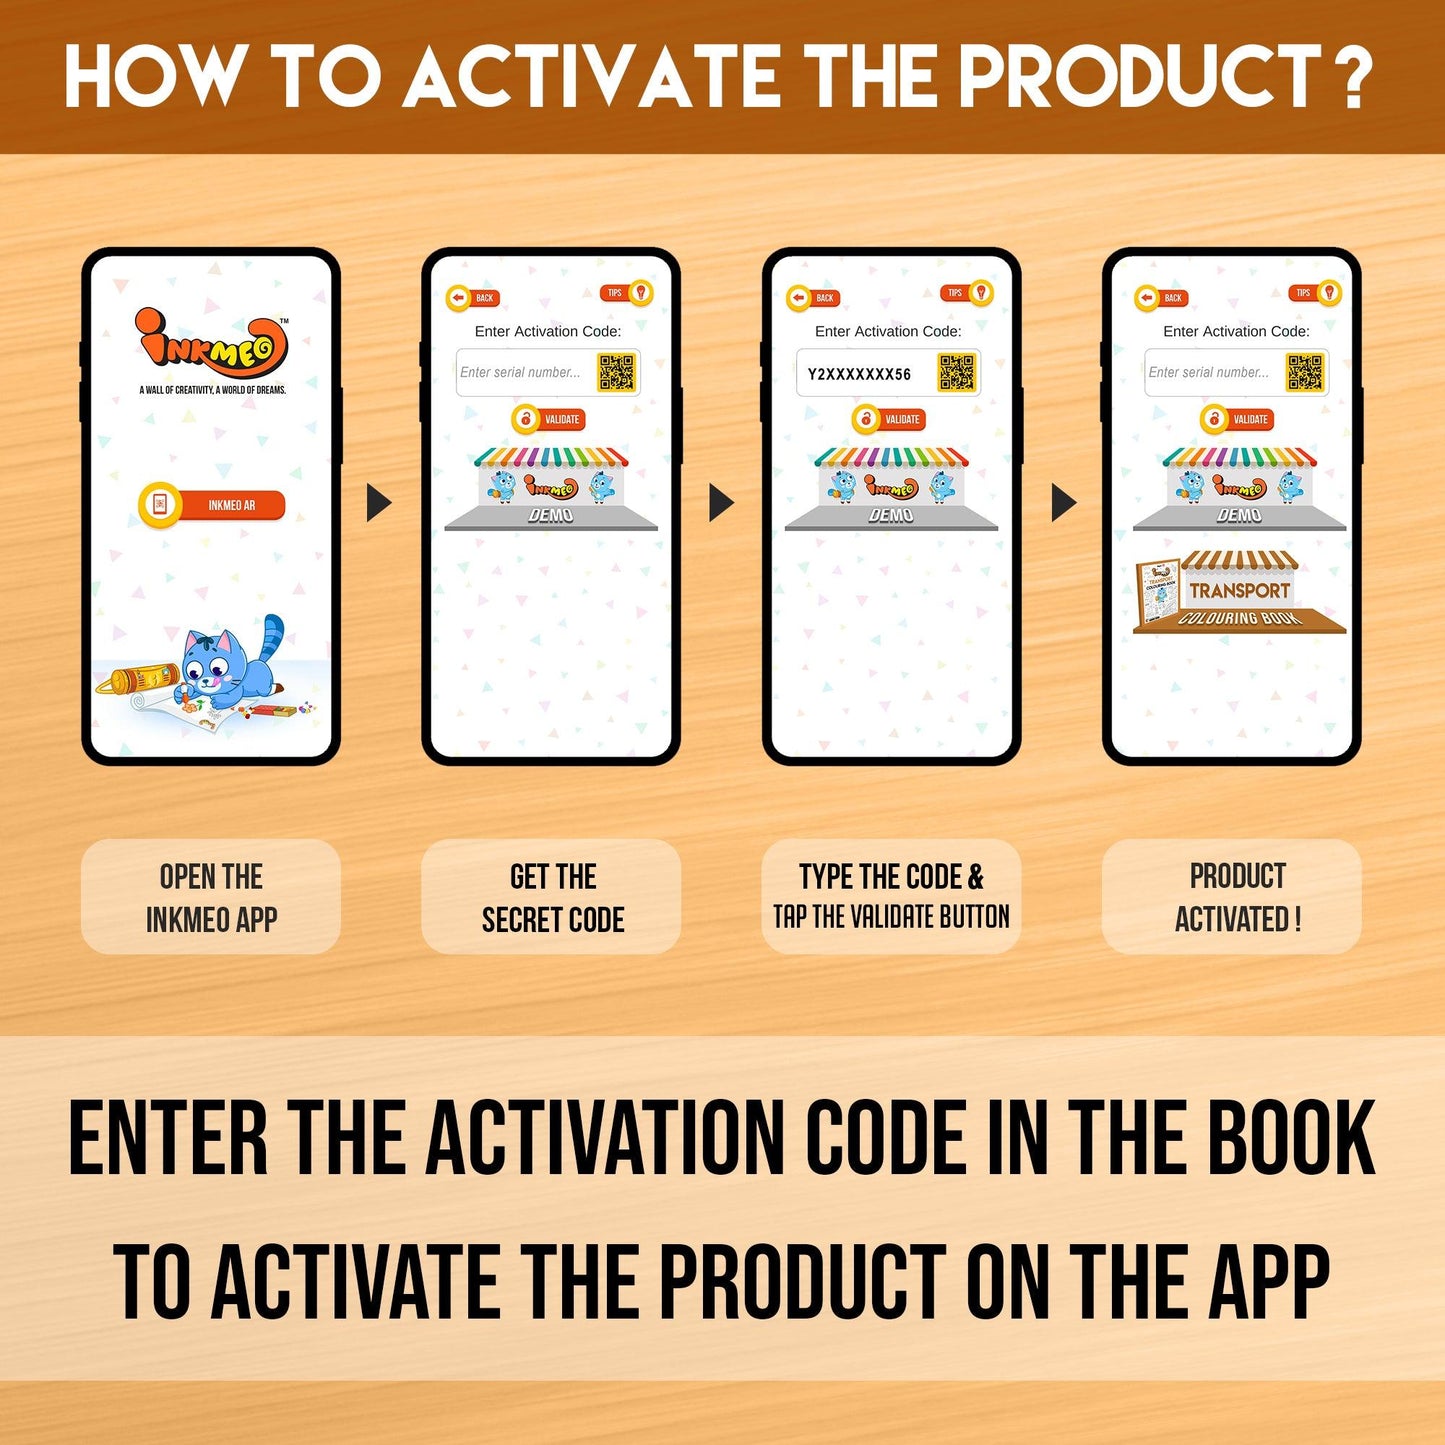  The image displays a brown background with four phones showcasing the message "To access the Inkmeo app, acquire the secret code, input the code, and tap for validation to activate the product.